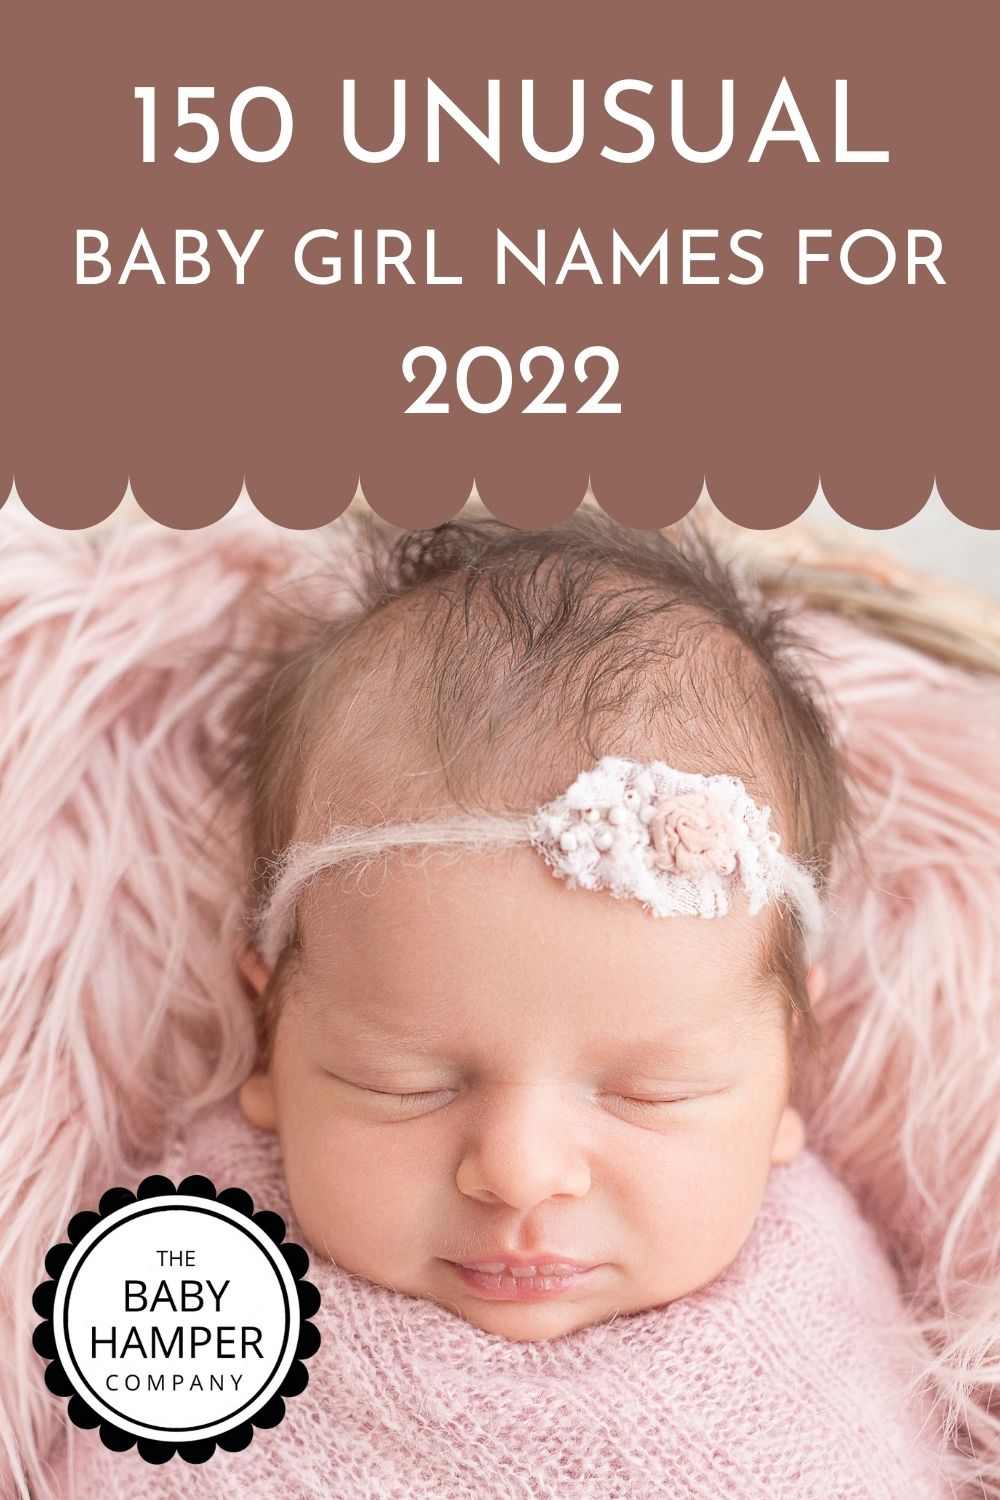 150 Unusual Baby Girl Names for 2022